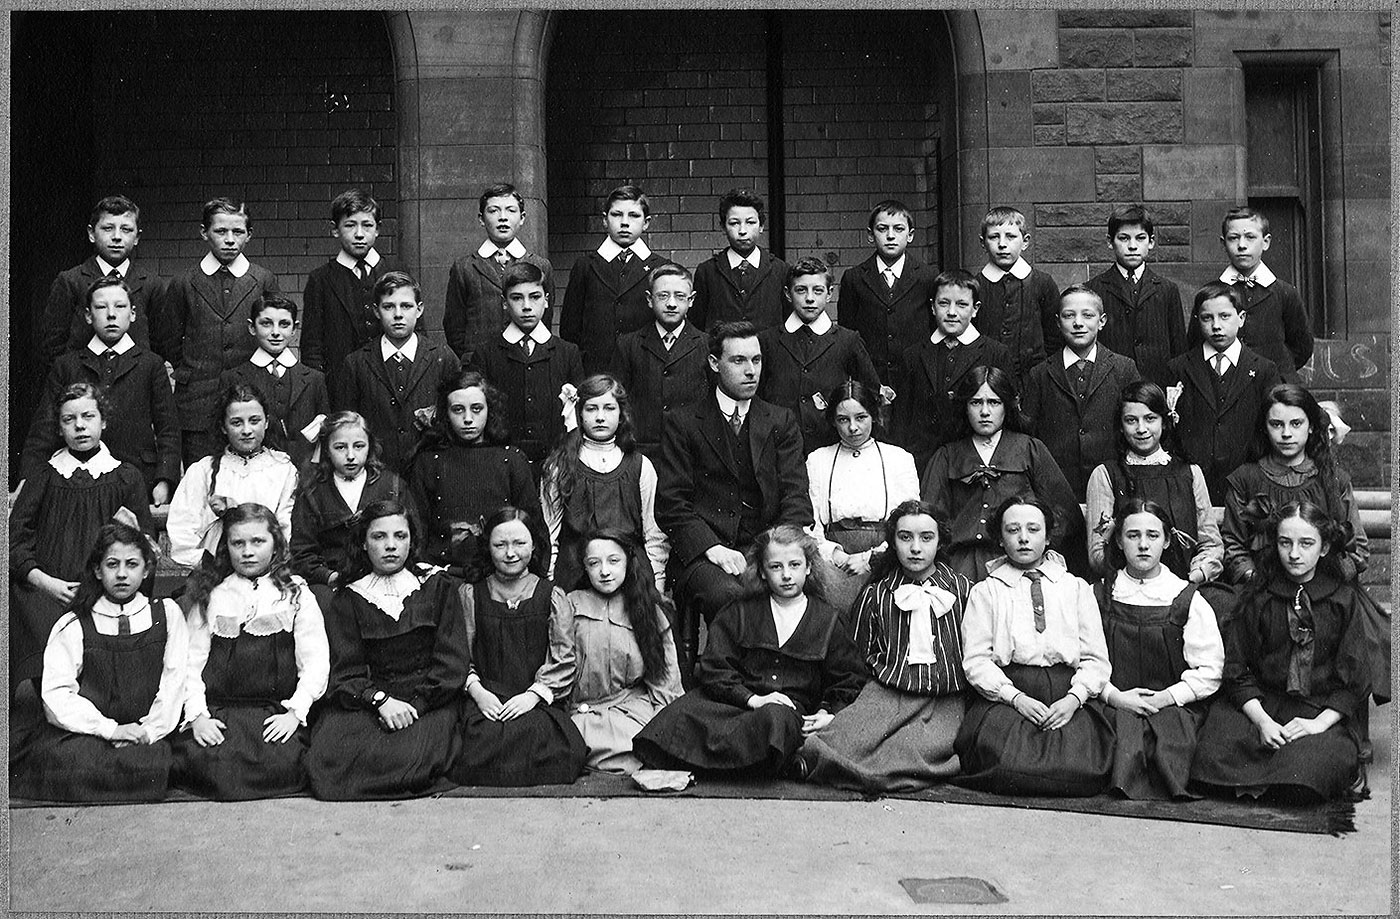 0_groups_and_outings_broughton_higher_grade_school_1911-12.htm#zoom-in